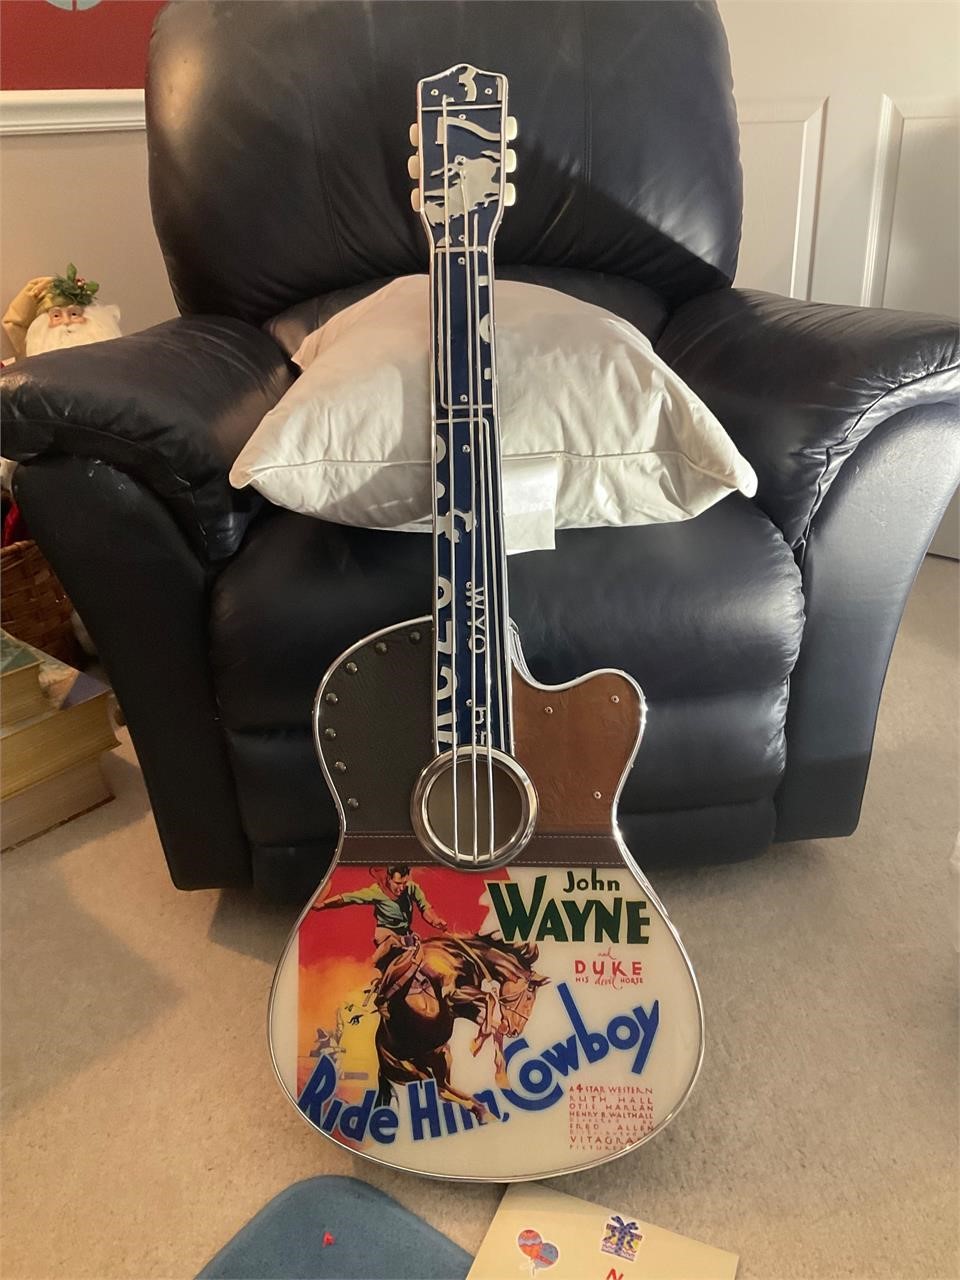 Guitar art signed by the artist